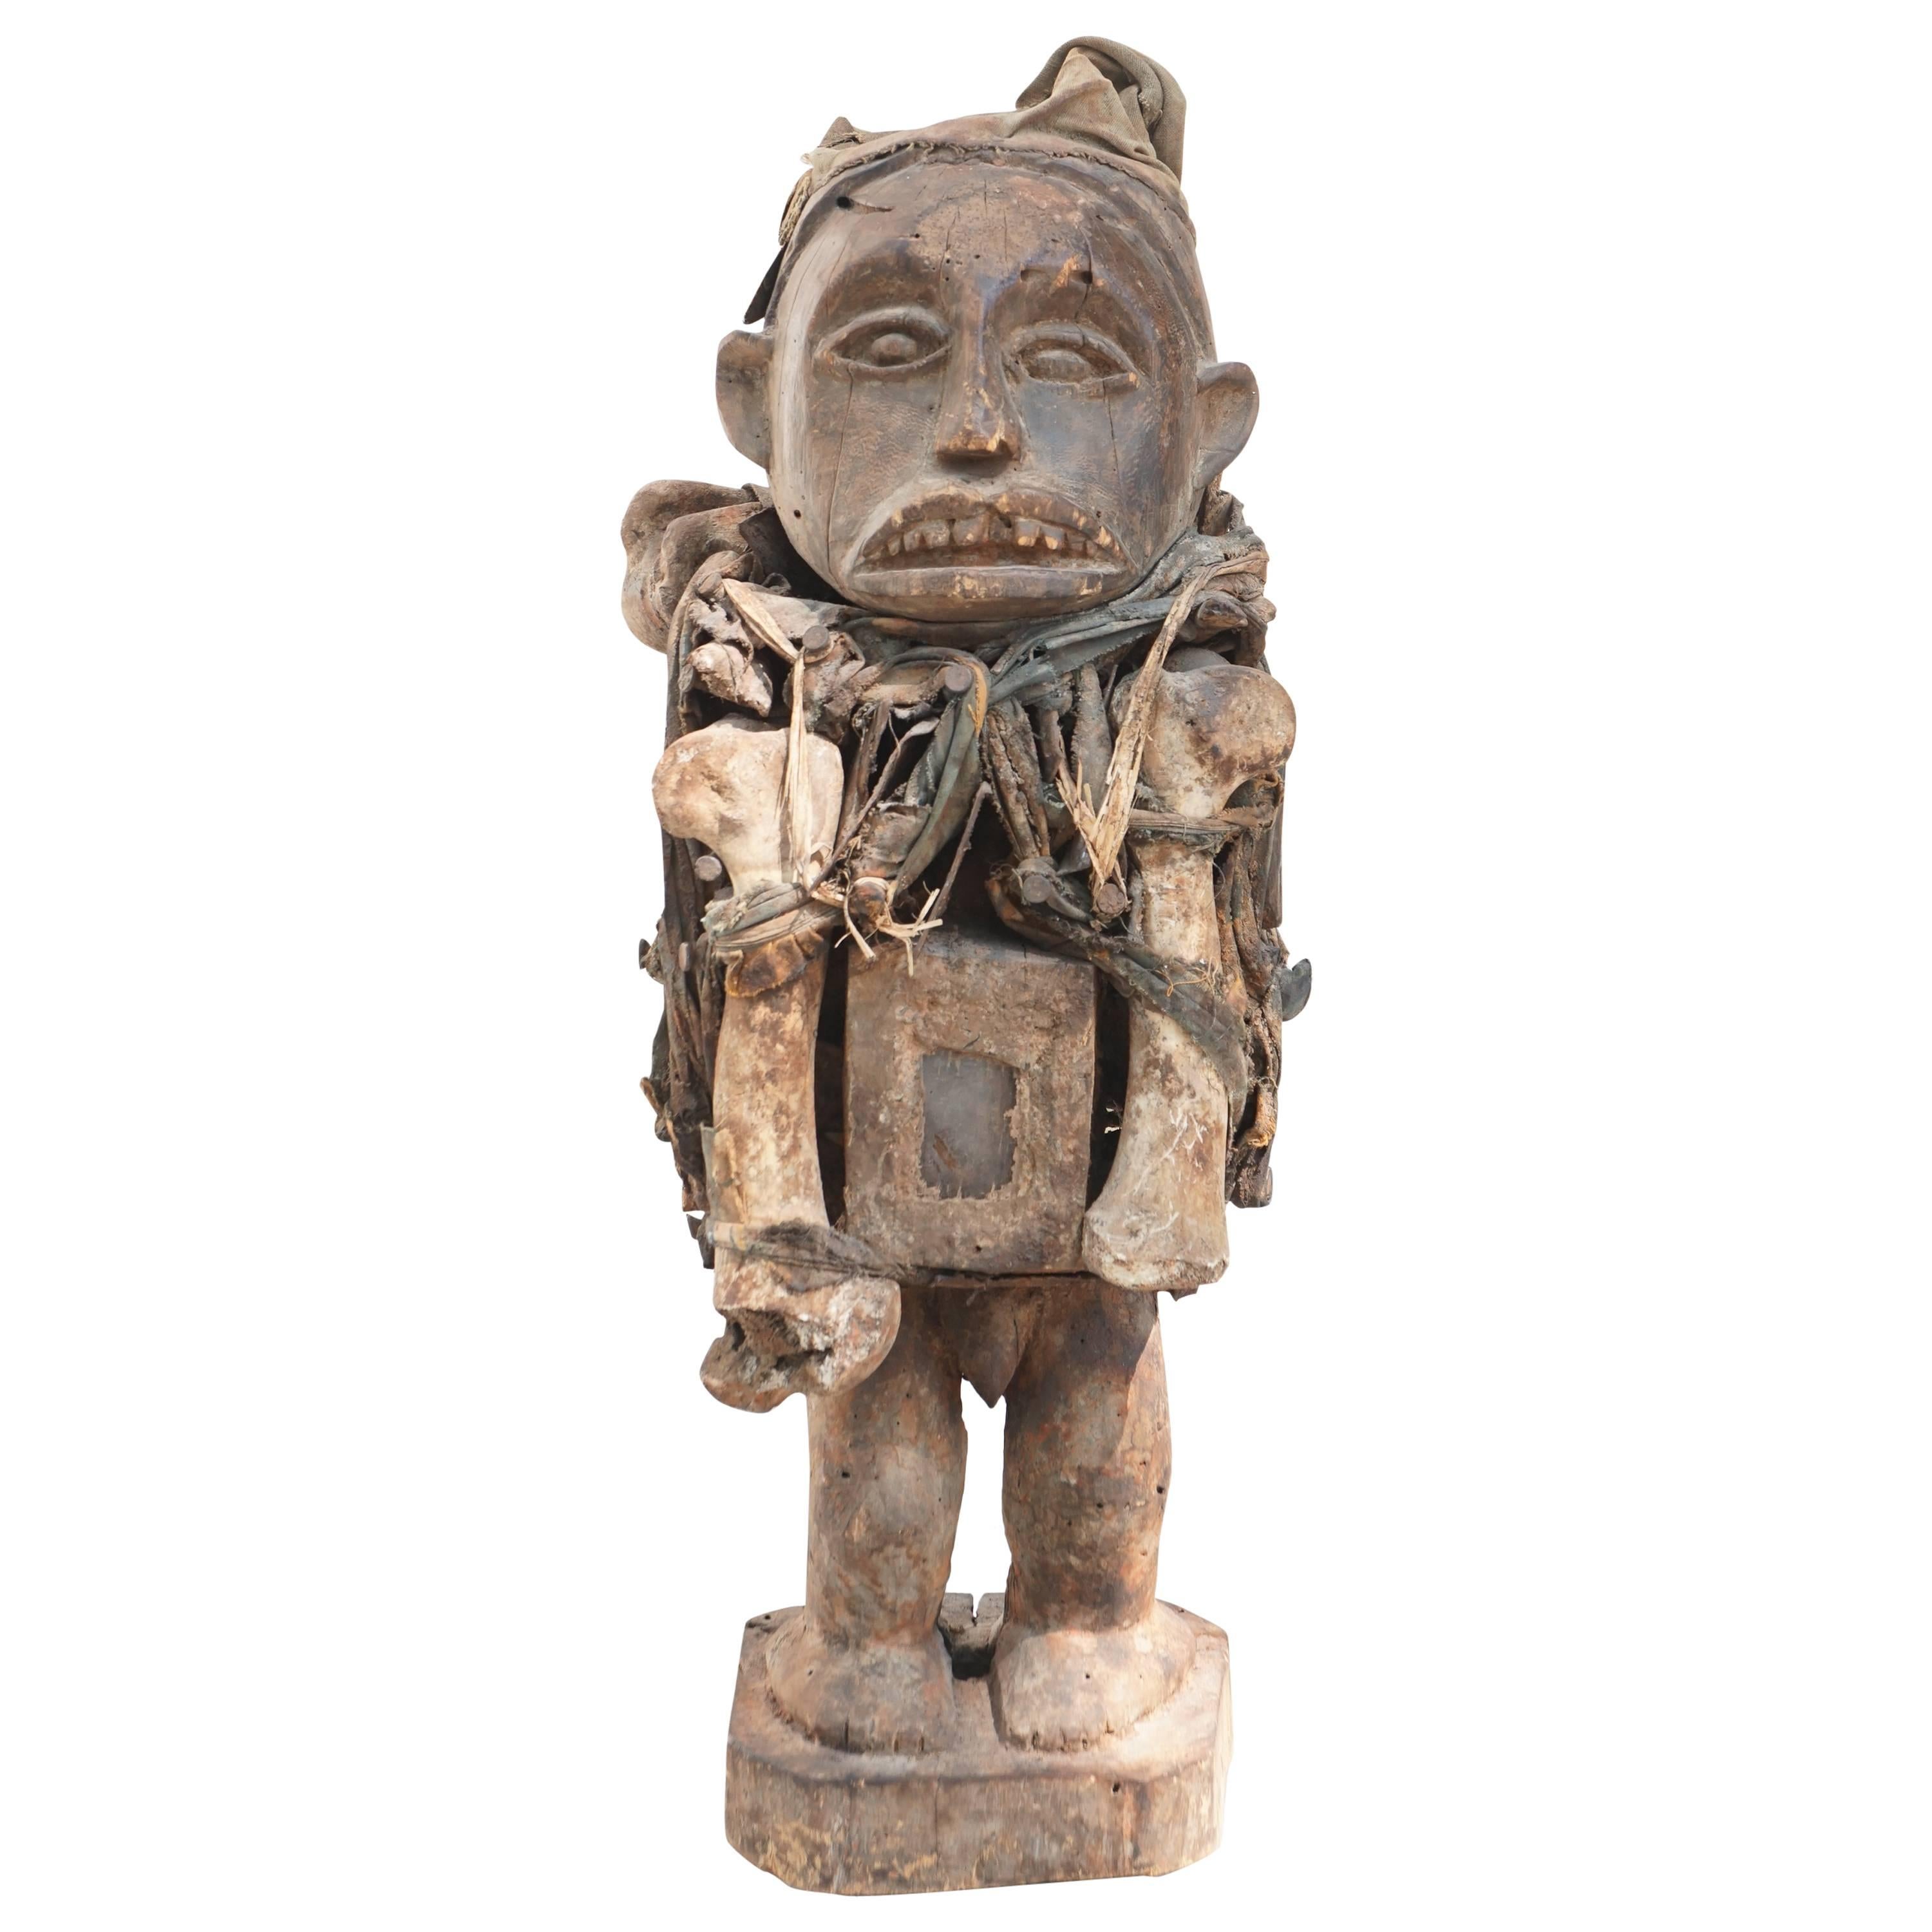 Late 19th Century Bakongo Peoples Carved Wood Fetish or Power Figure